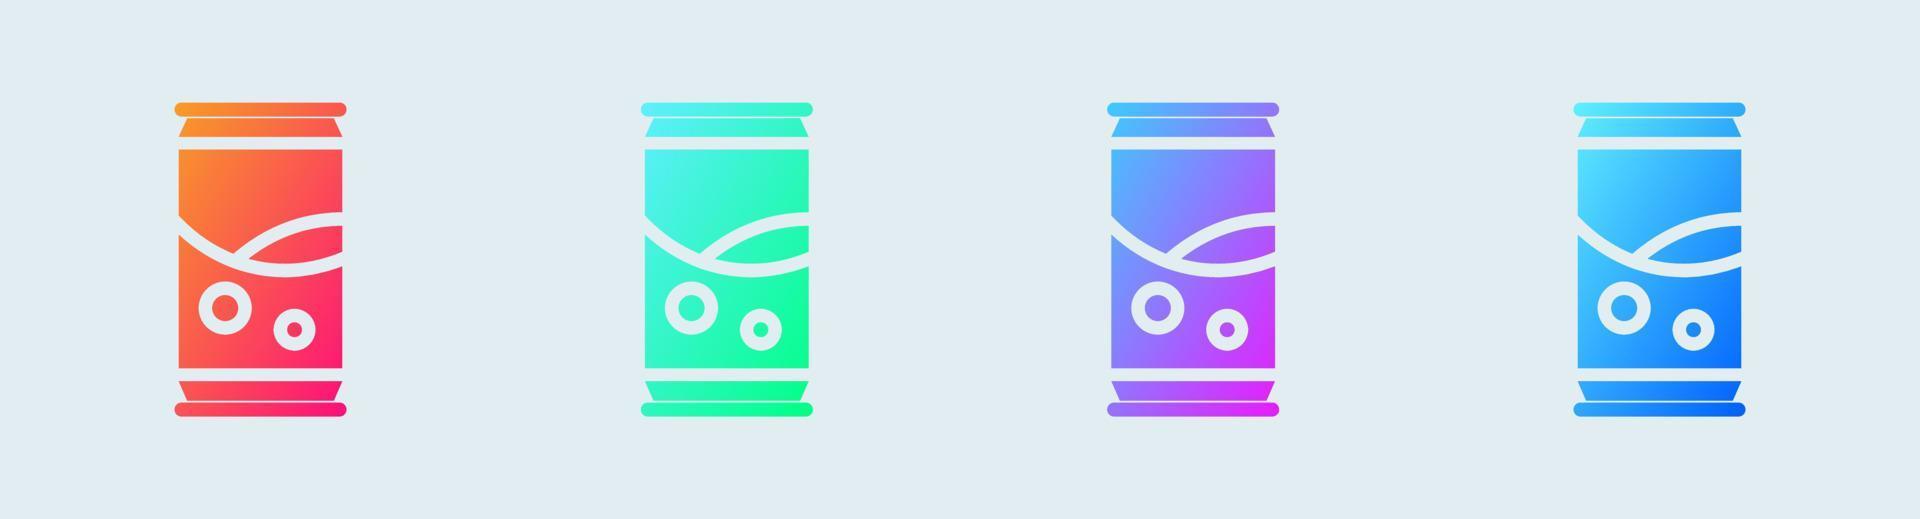 Soda solid icon in gradient colors. Soft drink signs vector illustration.